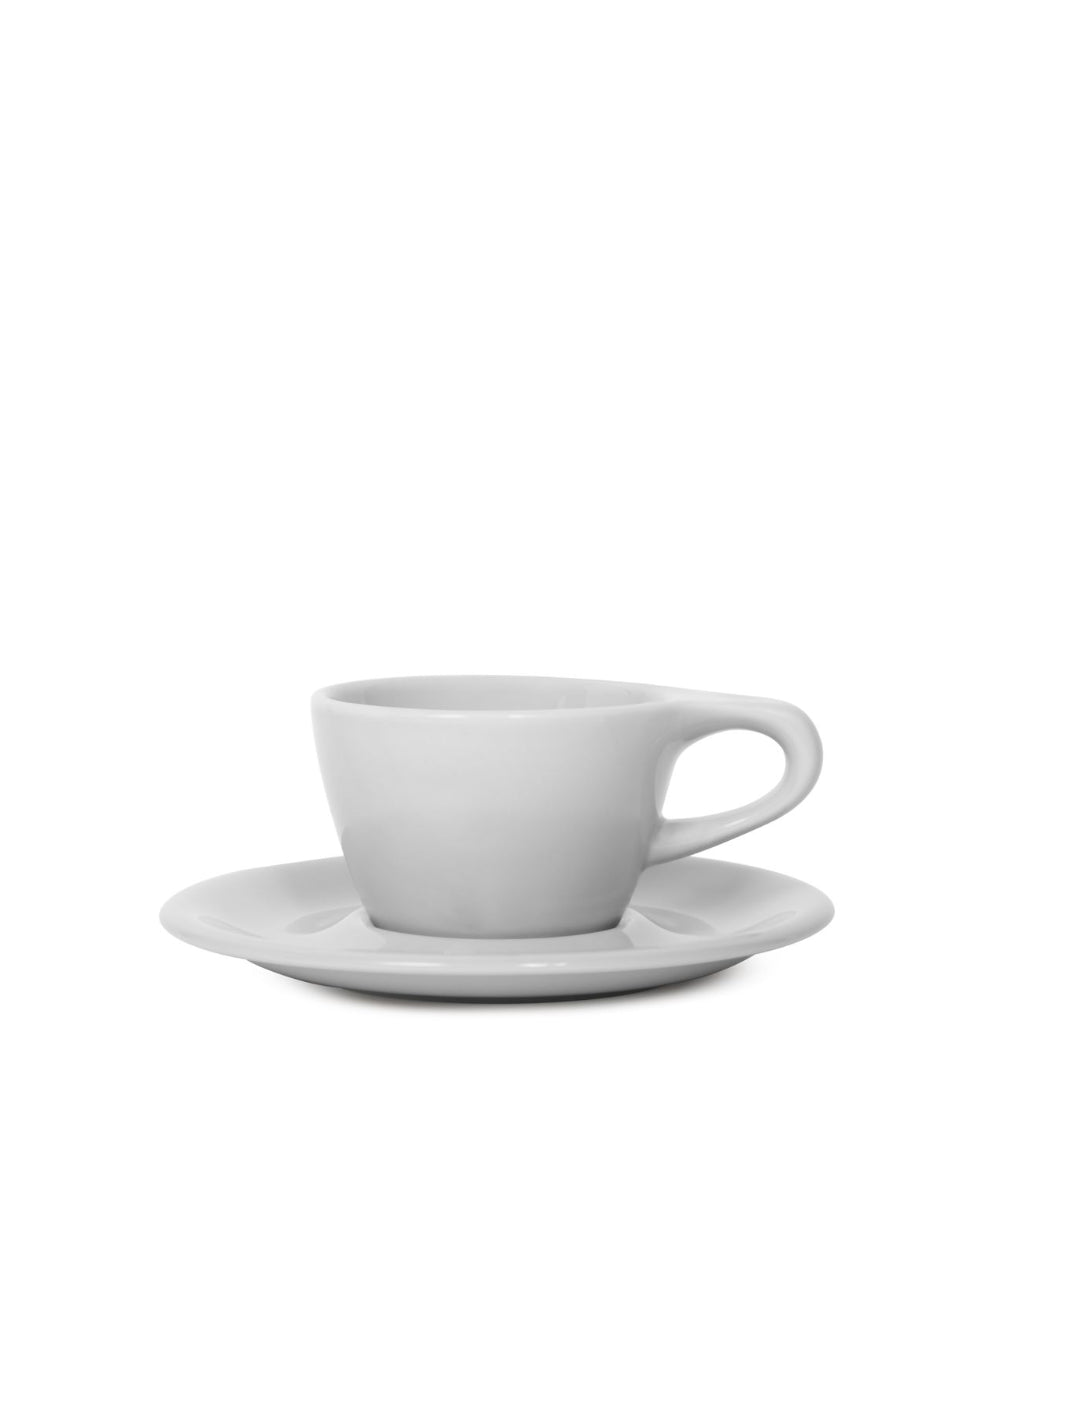 notNeutral LINO Single Cappuccino Cup (5oz/148ml) / Coffee Cups